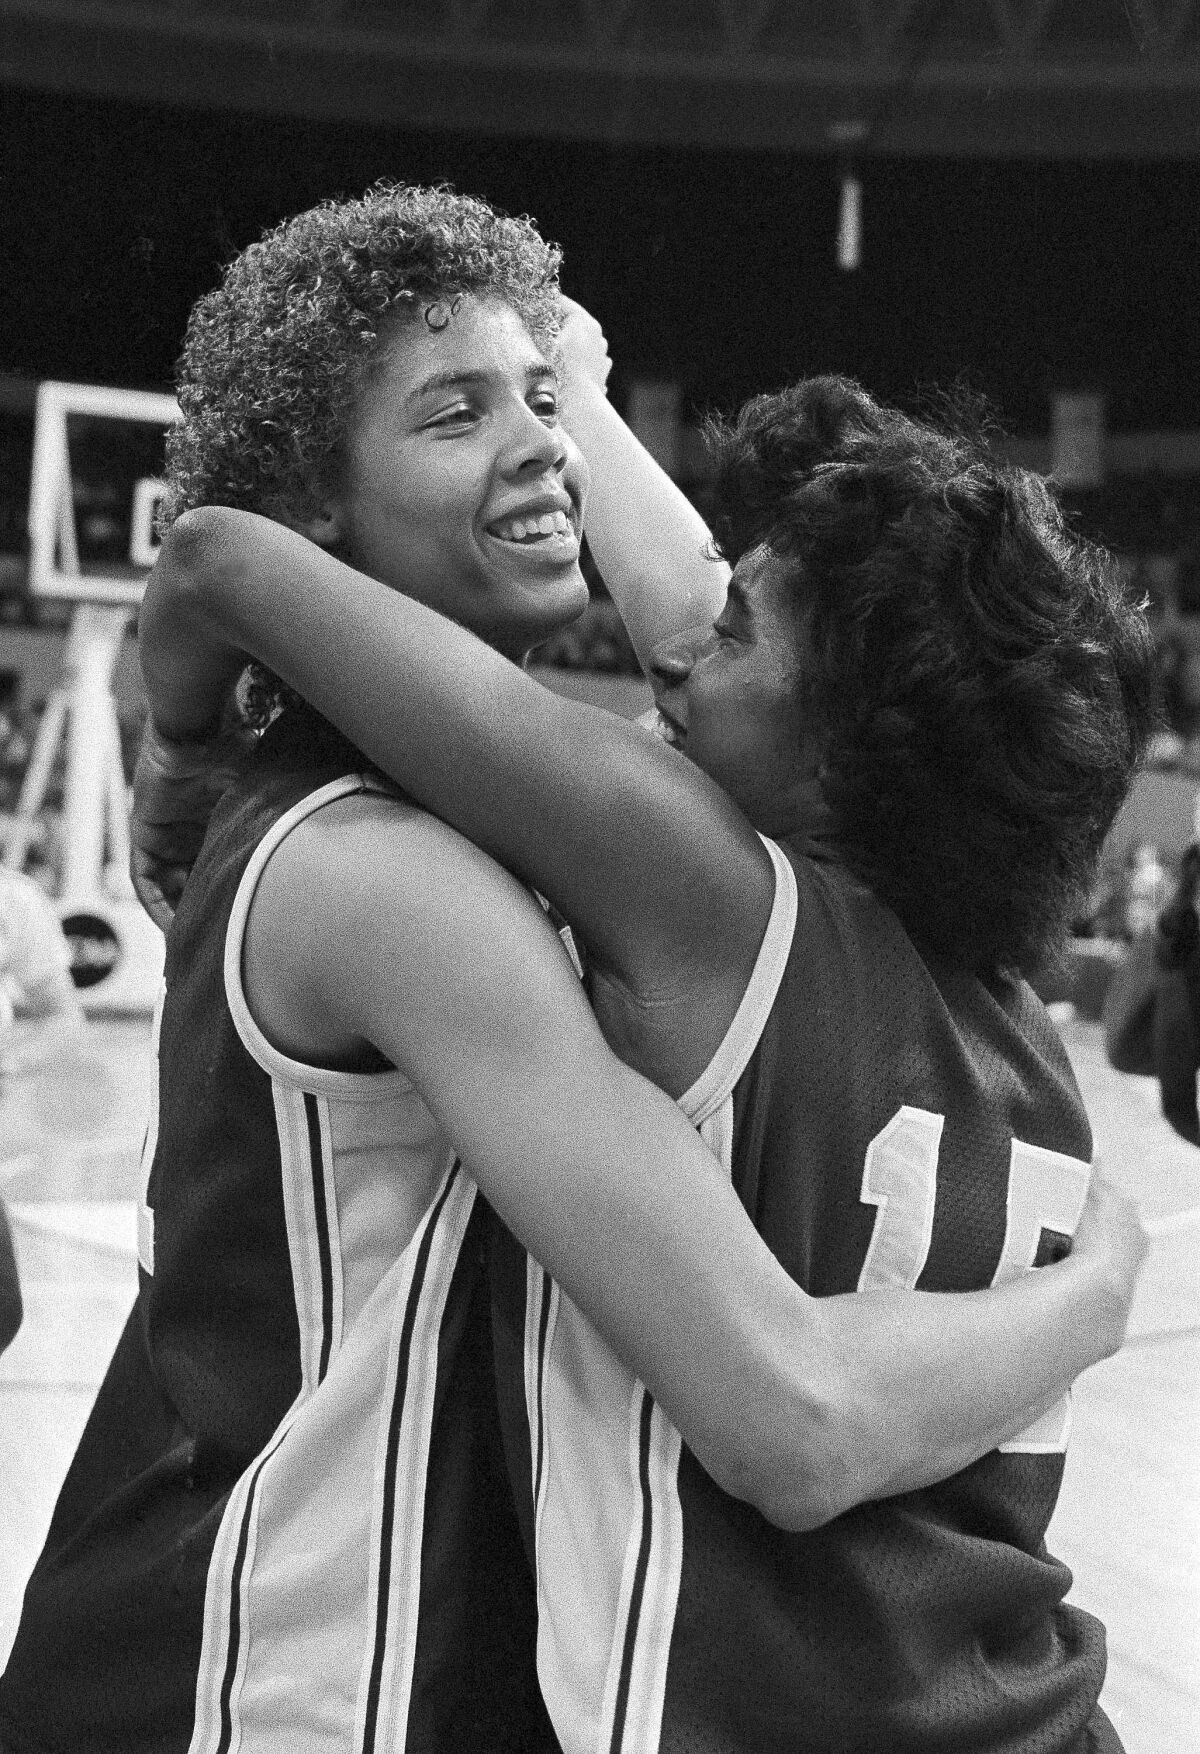 USC's Cheryl Miller, left, gets a hug from teammate Juliette Robinson after they defeated Georgia to move to the final game of the NCAA women's basketball tournament, in Norfolk, Va., on April 1, 1983.